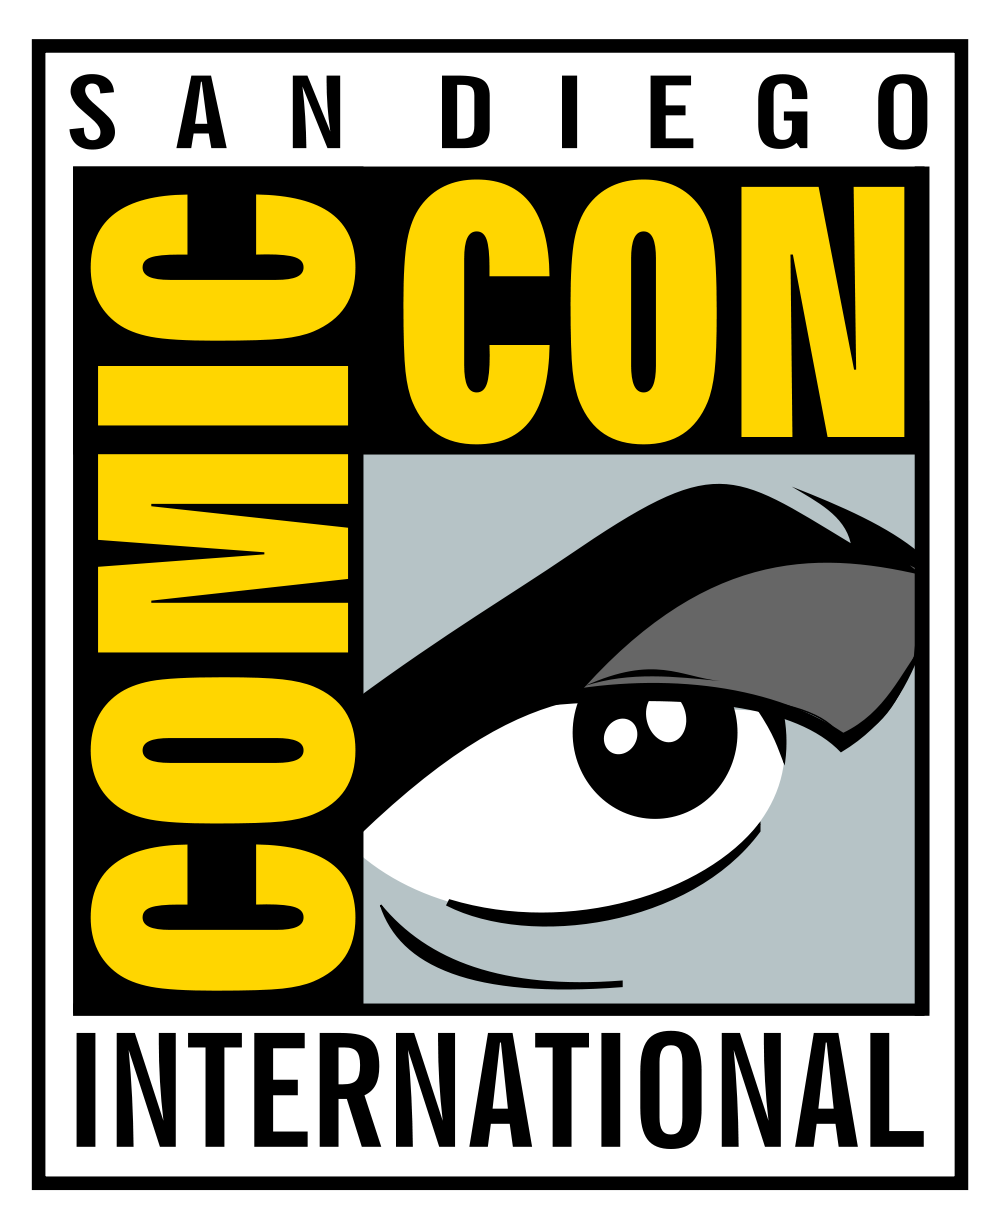 A few exciting snippets from the Comic-Con 2011 Schedule, so far!